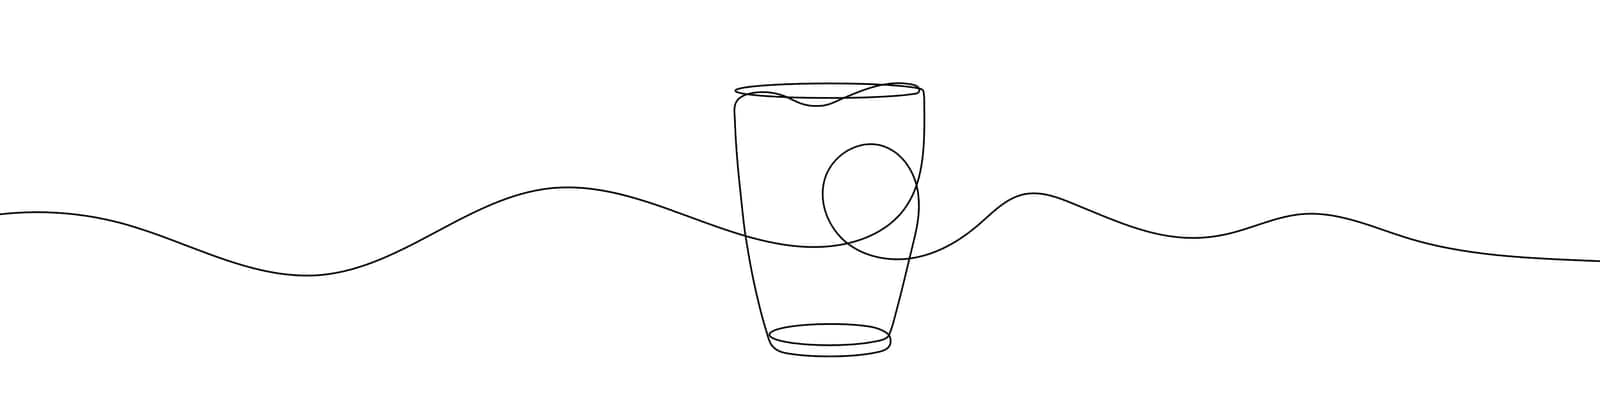 Continuous line drawing of glassful. Cup continuous line icon. by Chekman